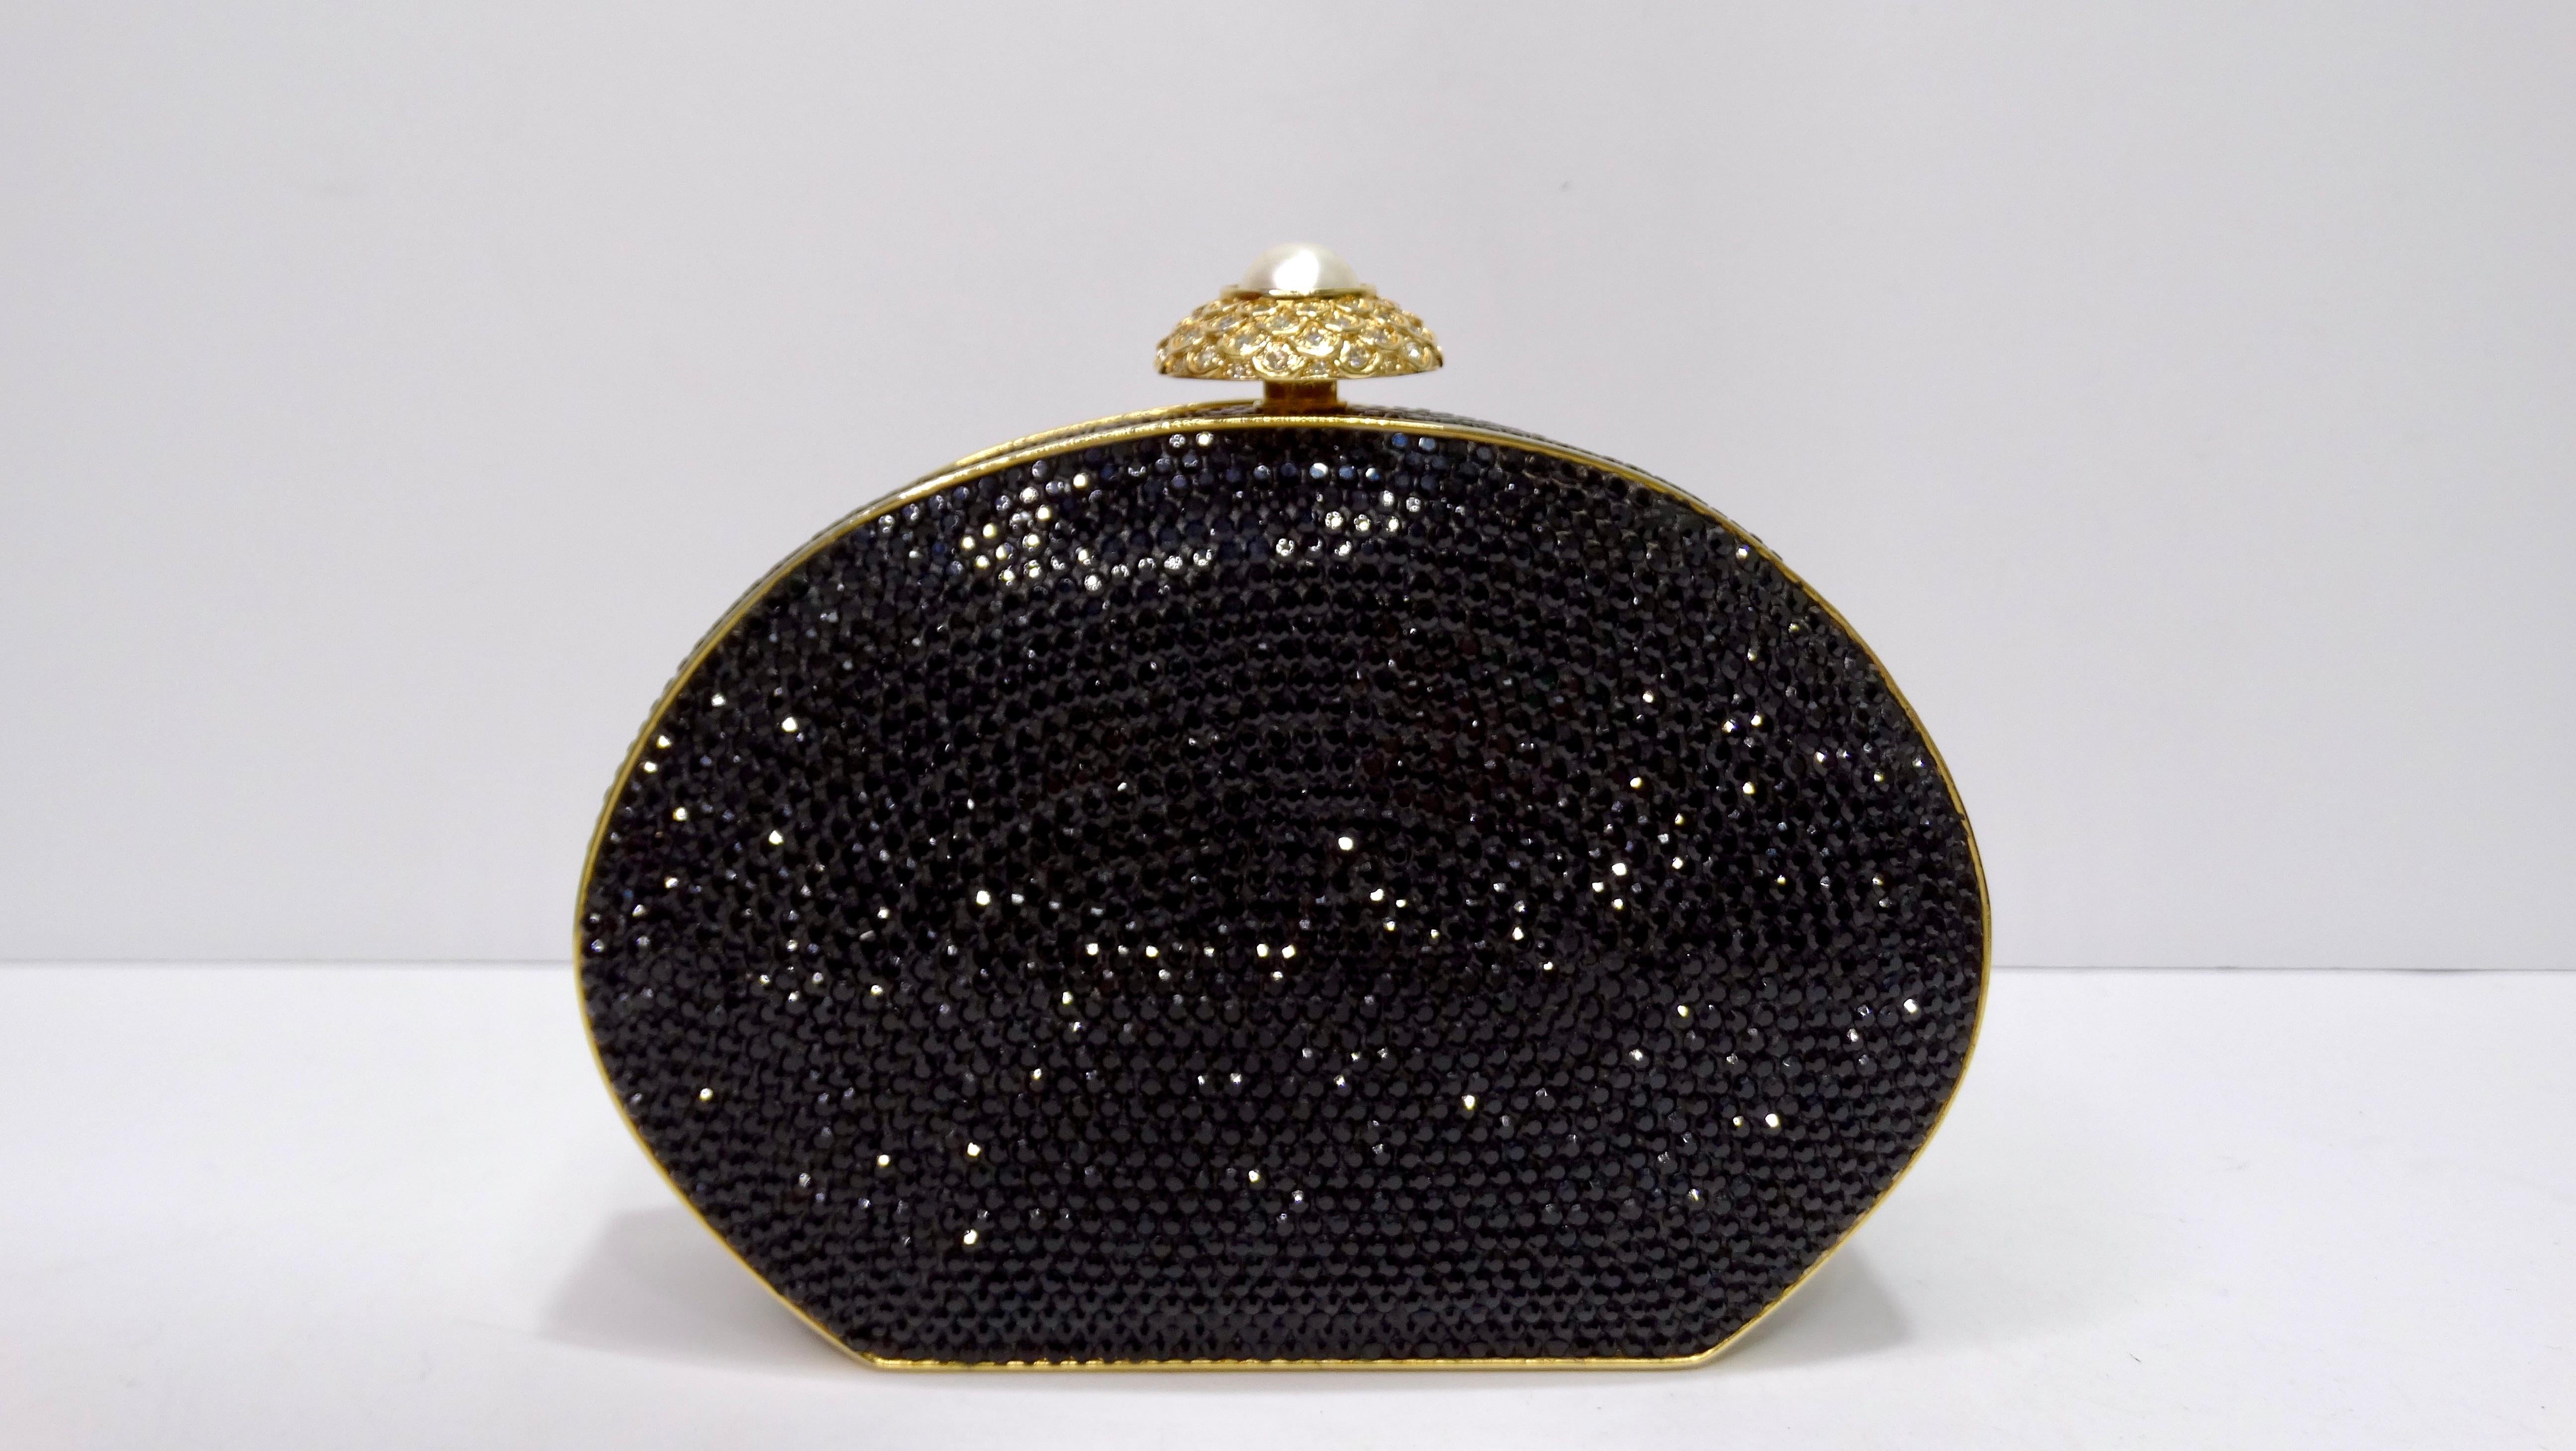 Elegance and glamor right this way! This is a highly designed handbag that will catch people's attention from across the room. This is a BEAUTIFUL Judith Leiber Black Swarovski Crystal Minaudiere Evening Bag Clutch in excellent condition. The